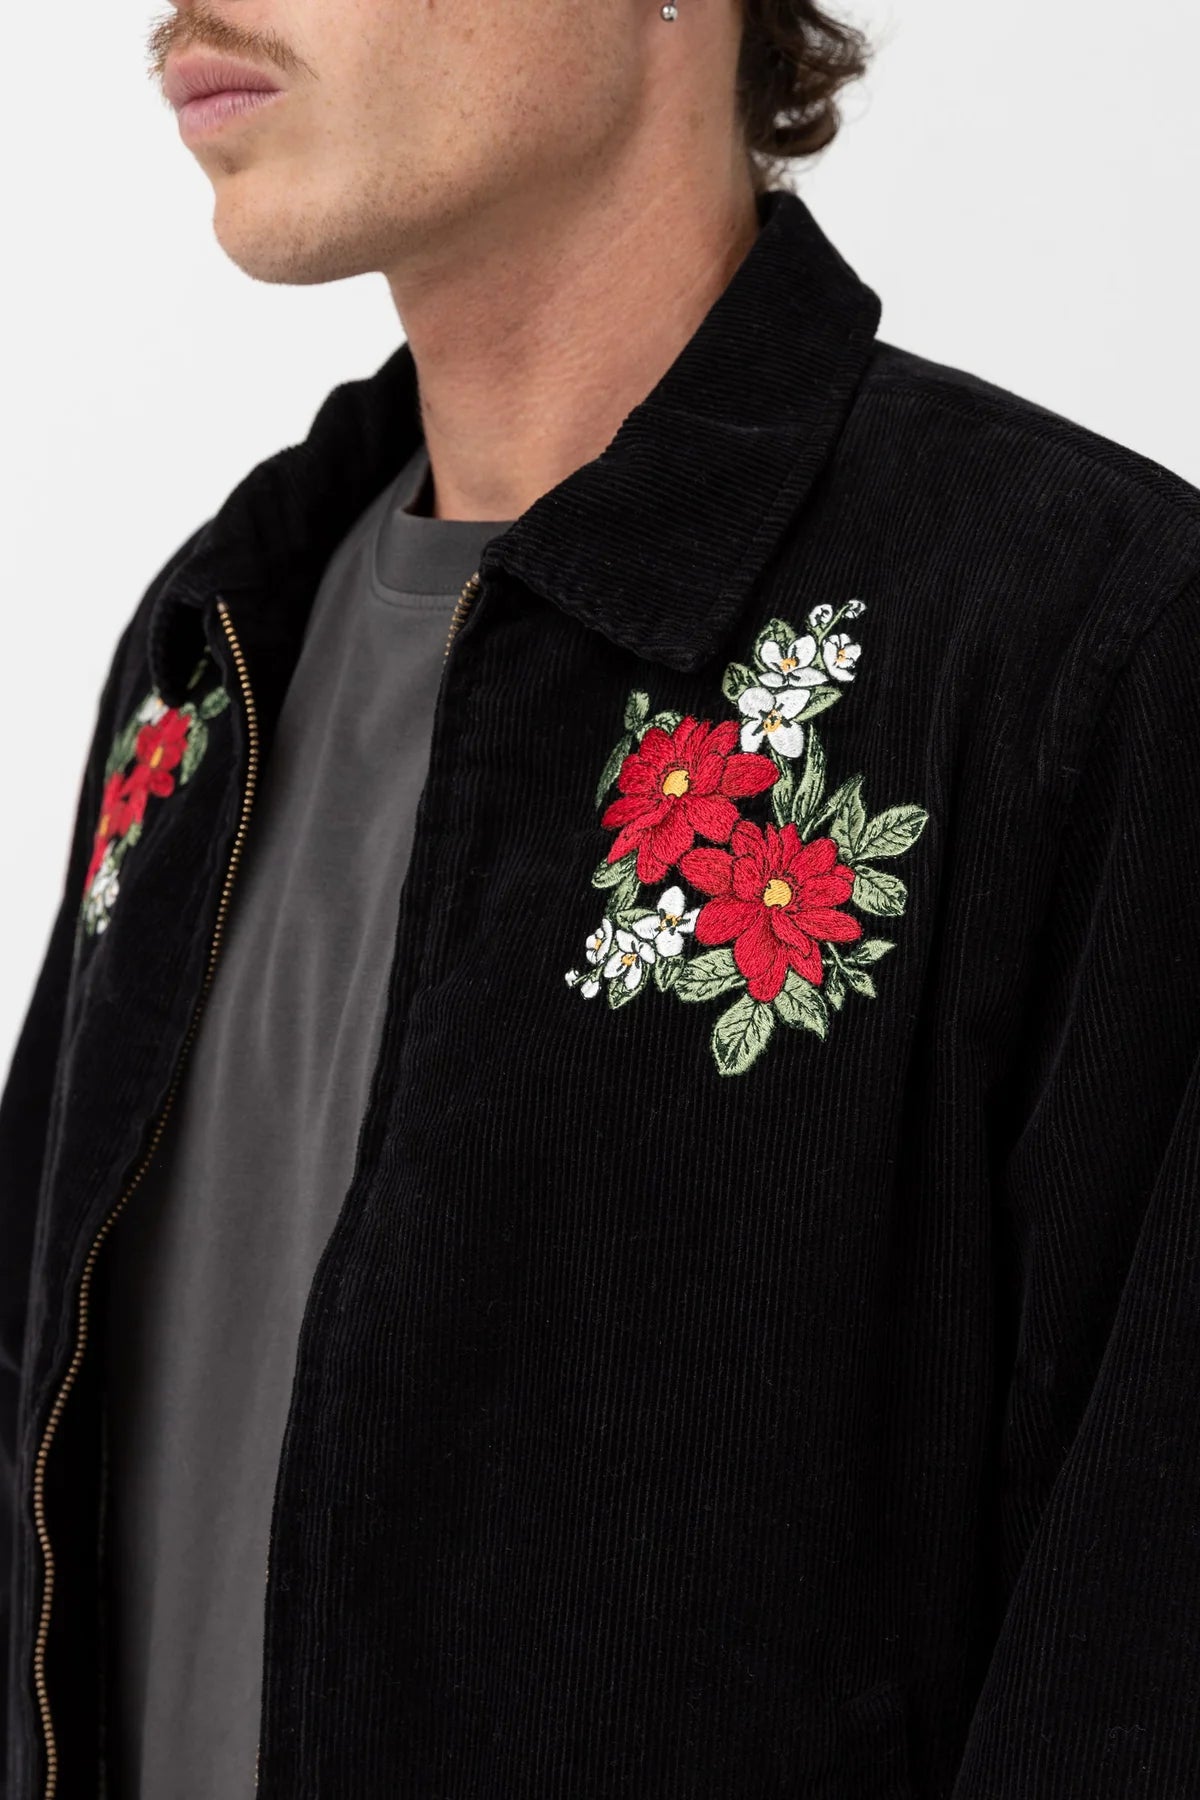 rhythm cord james jacket zip up black floral print embroidered stitch kempt athens ga mens clothing store downtown athens ga